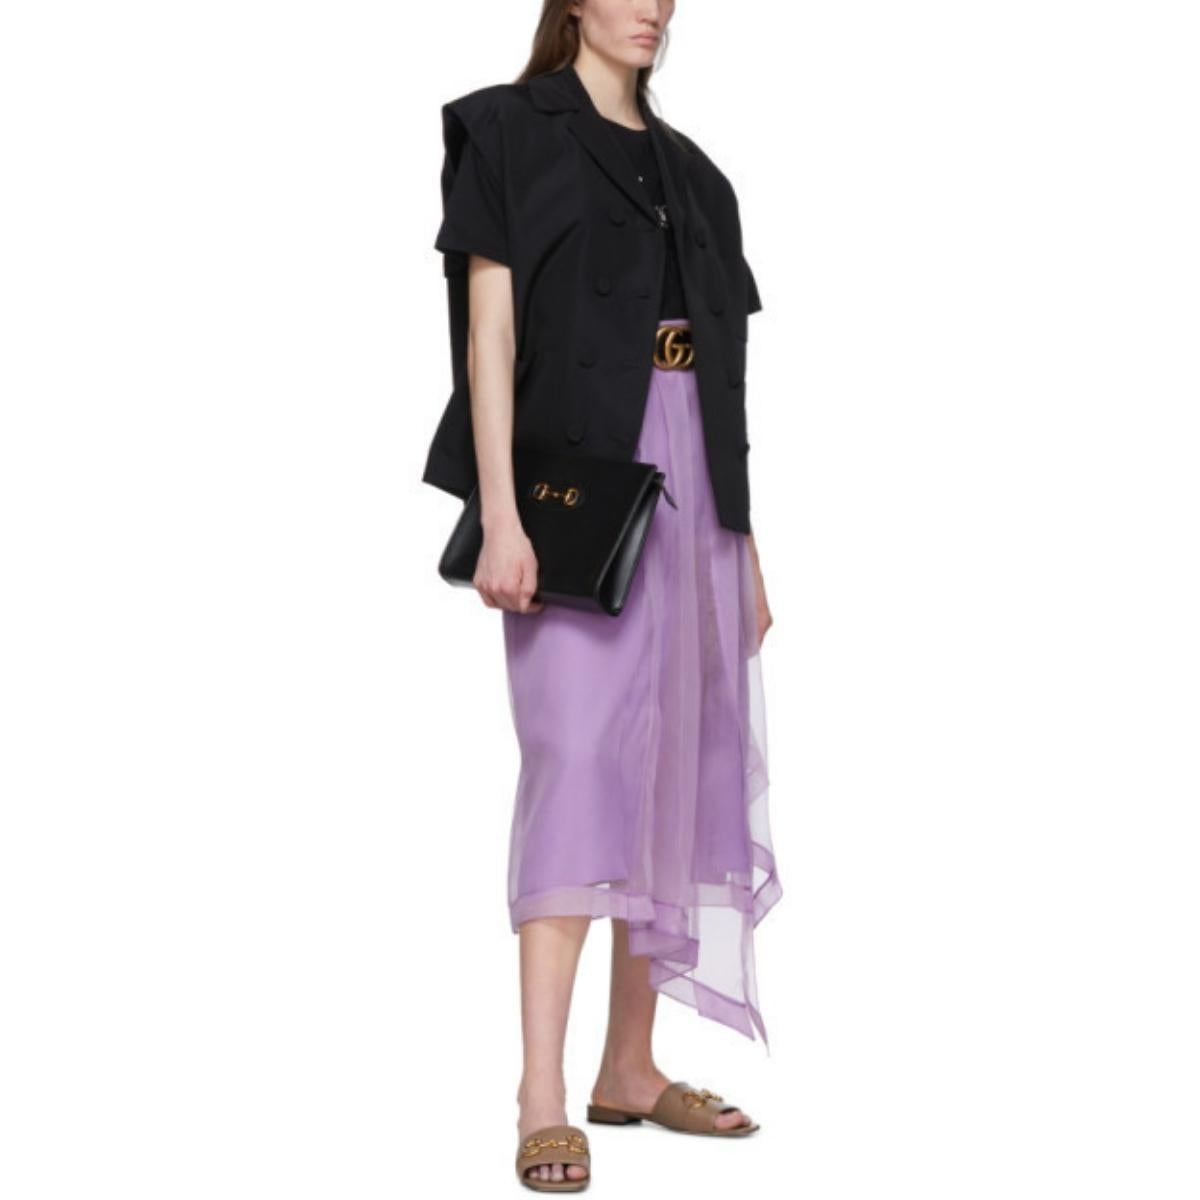 Silk organza skirt with slit. 
Detachable tonal crepe underskirt with elastic waistband. 
Asymmetrical design. 
Pleated front. 
Front left slit. 
Side zip
Color: Purple
100% silk.
Lining (interior removable)73% acetate, 27% silk)
Made in Italy